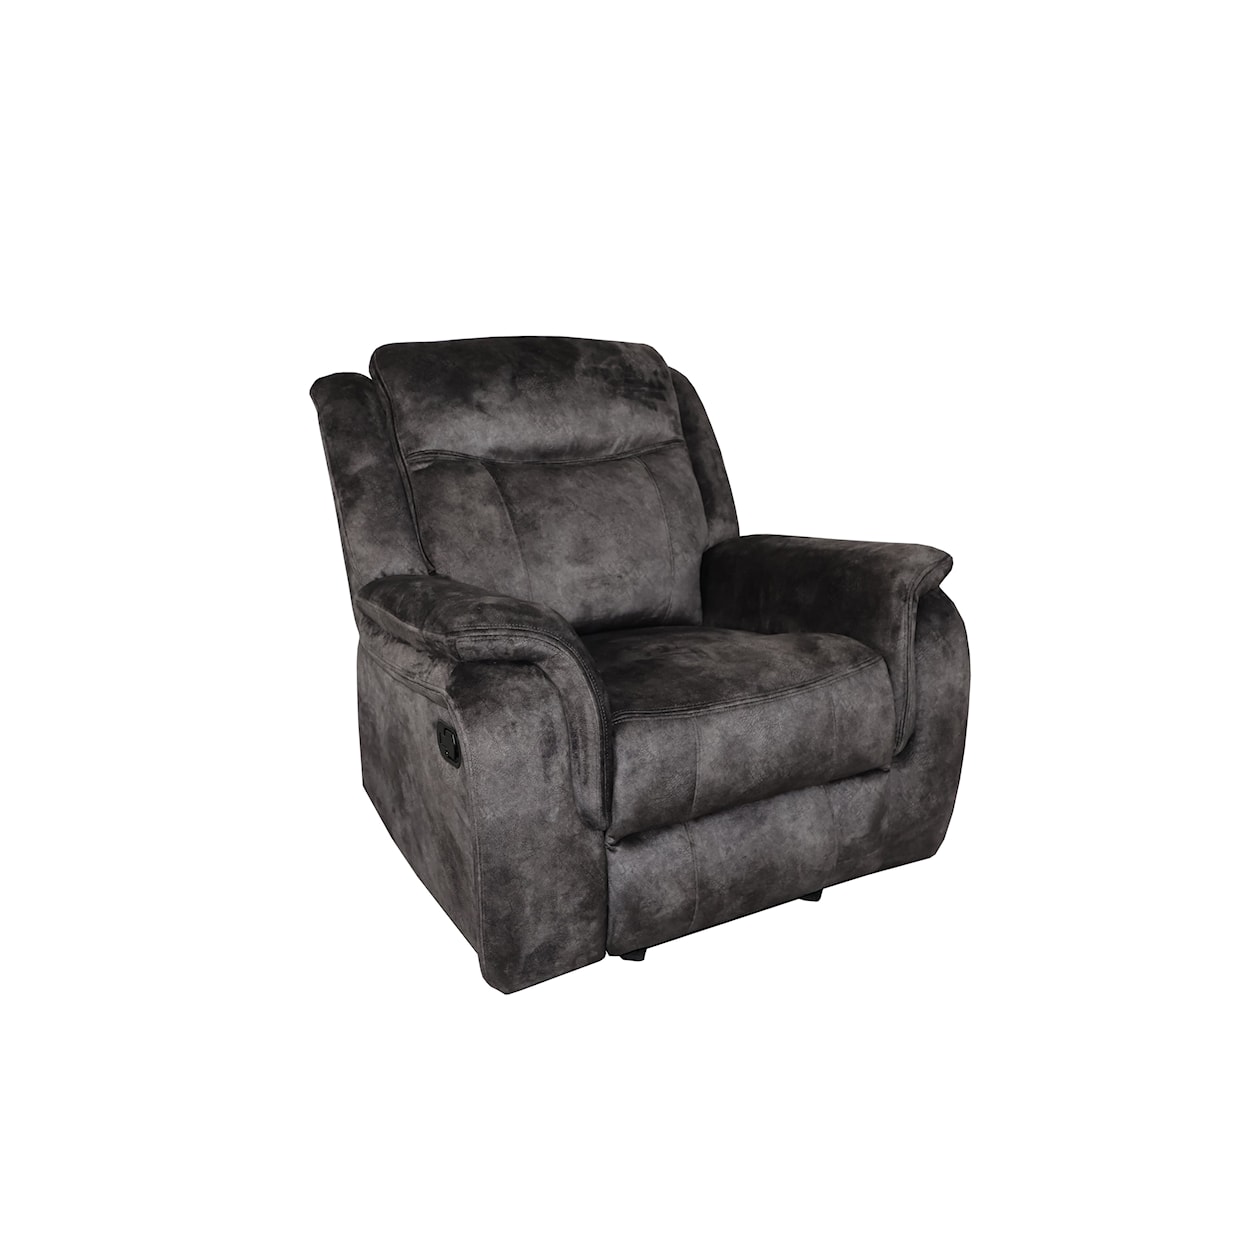 New Classic Furniture Park City Upholstered Glider Recliner